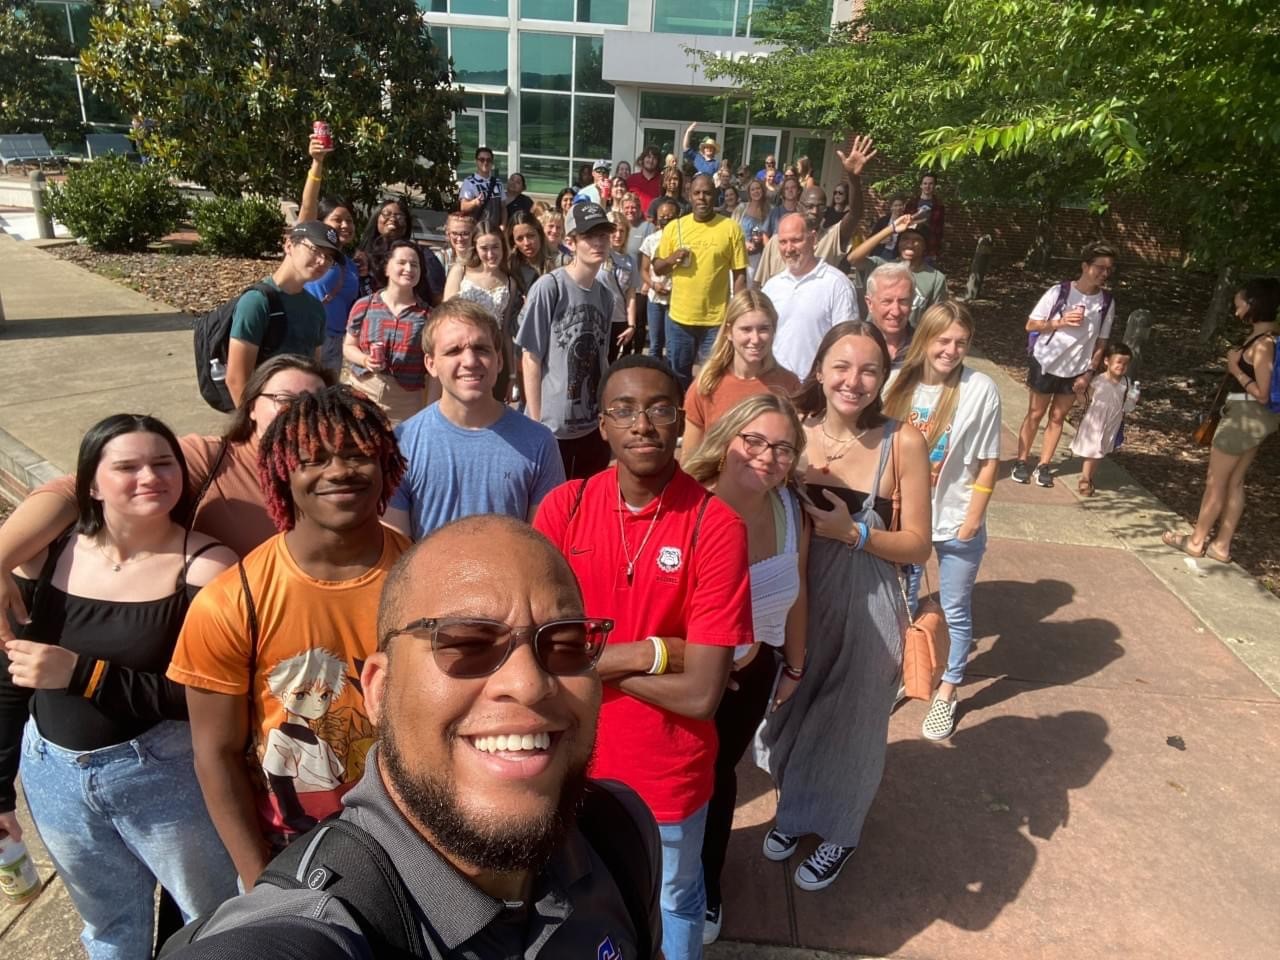  Students in orientation pose for a selfie on ChattState campus.